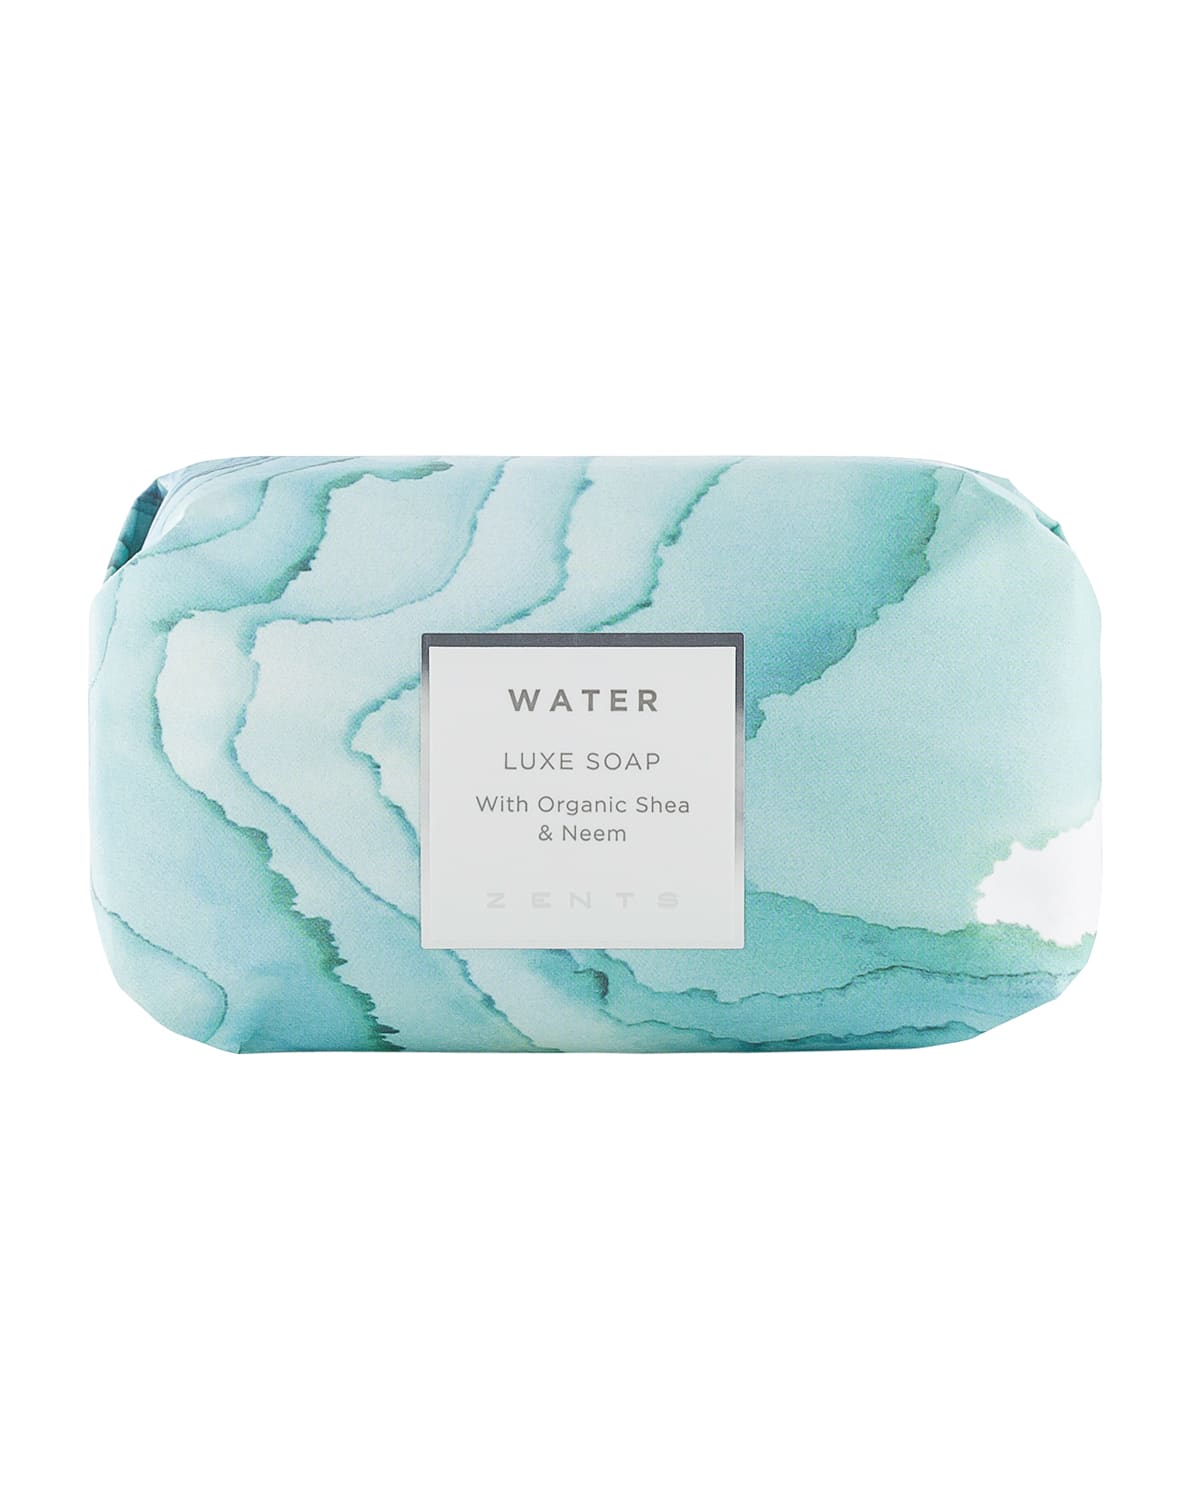 5.7 oz. Water Luxe Soap